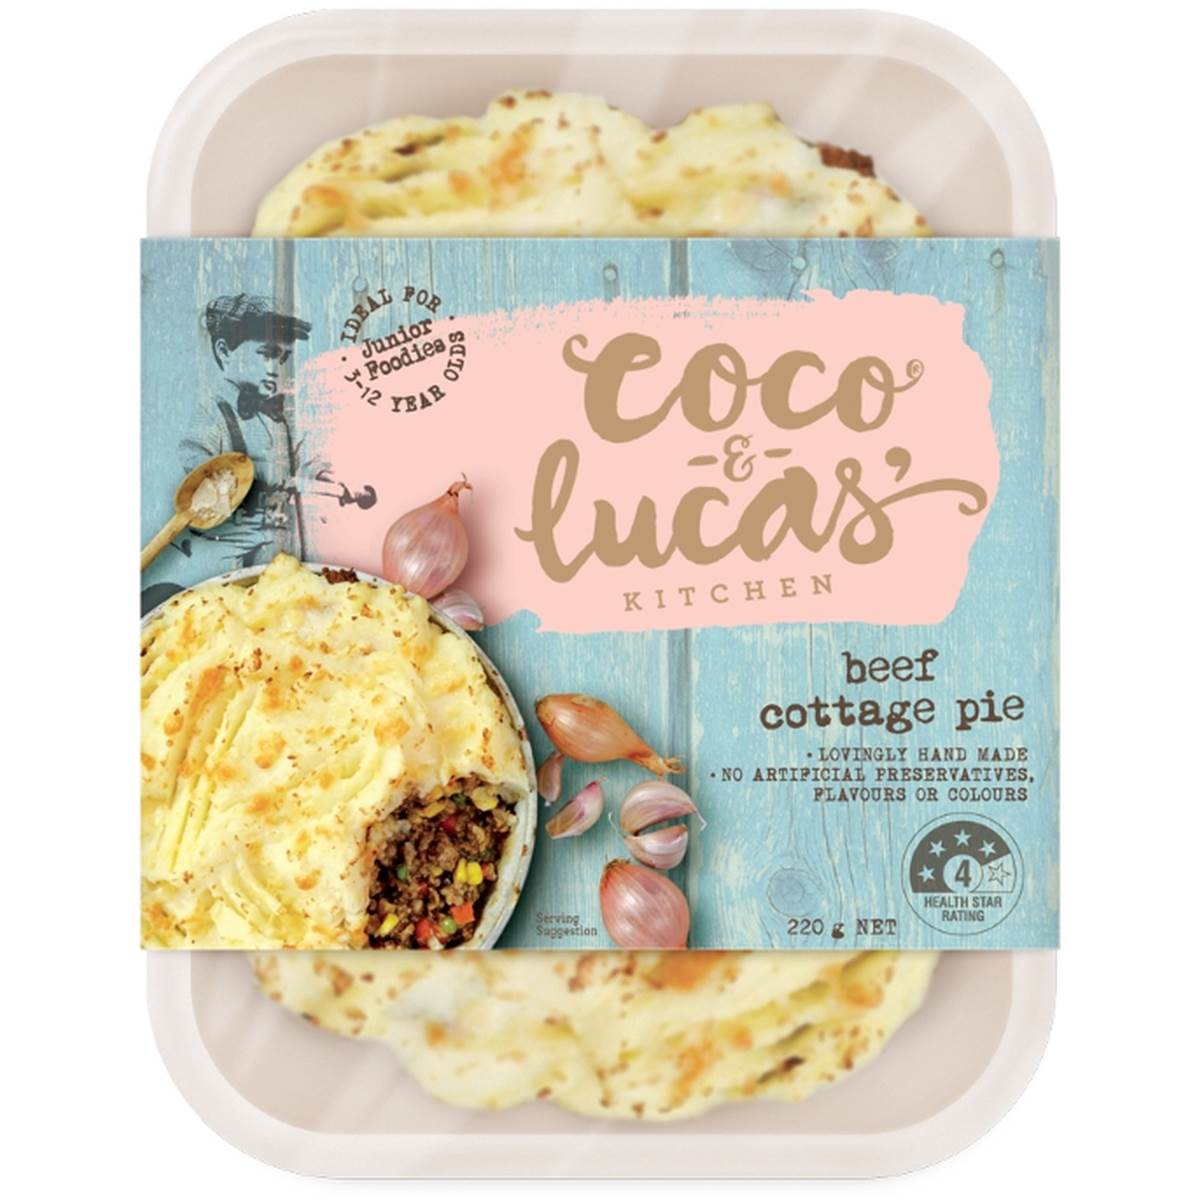 Coco & Lucas' Beef Cottage Pie 